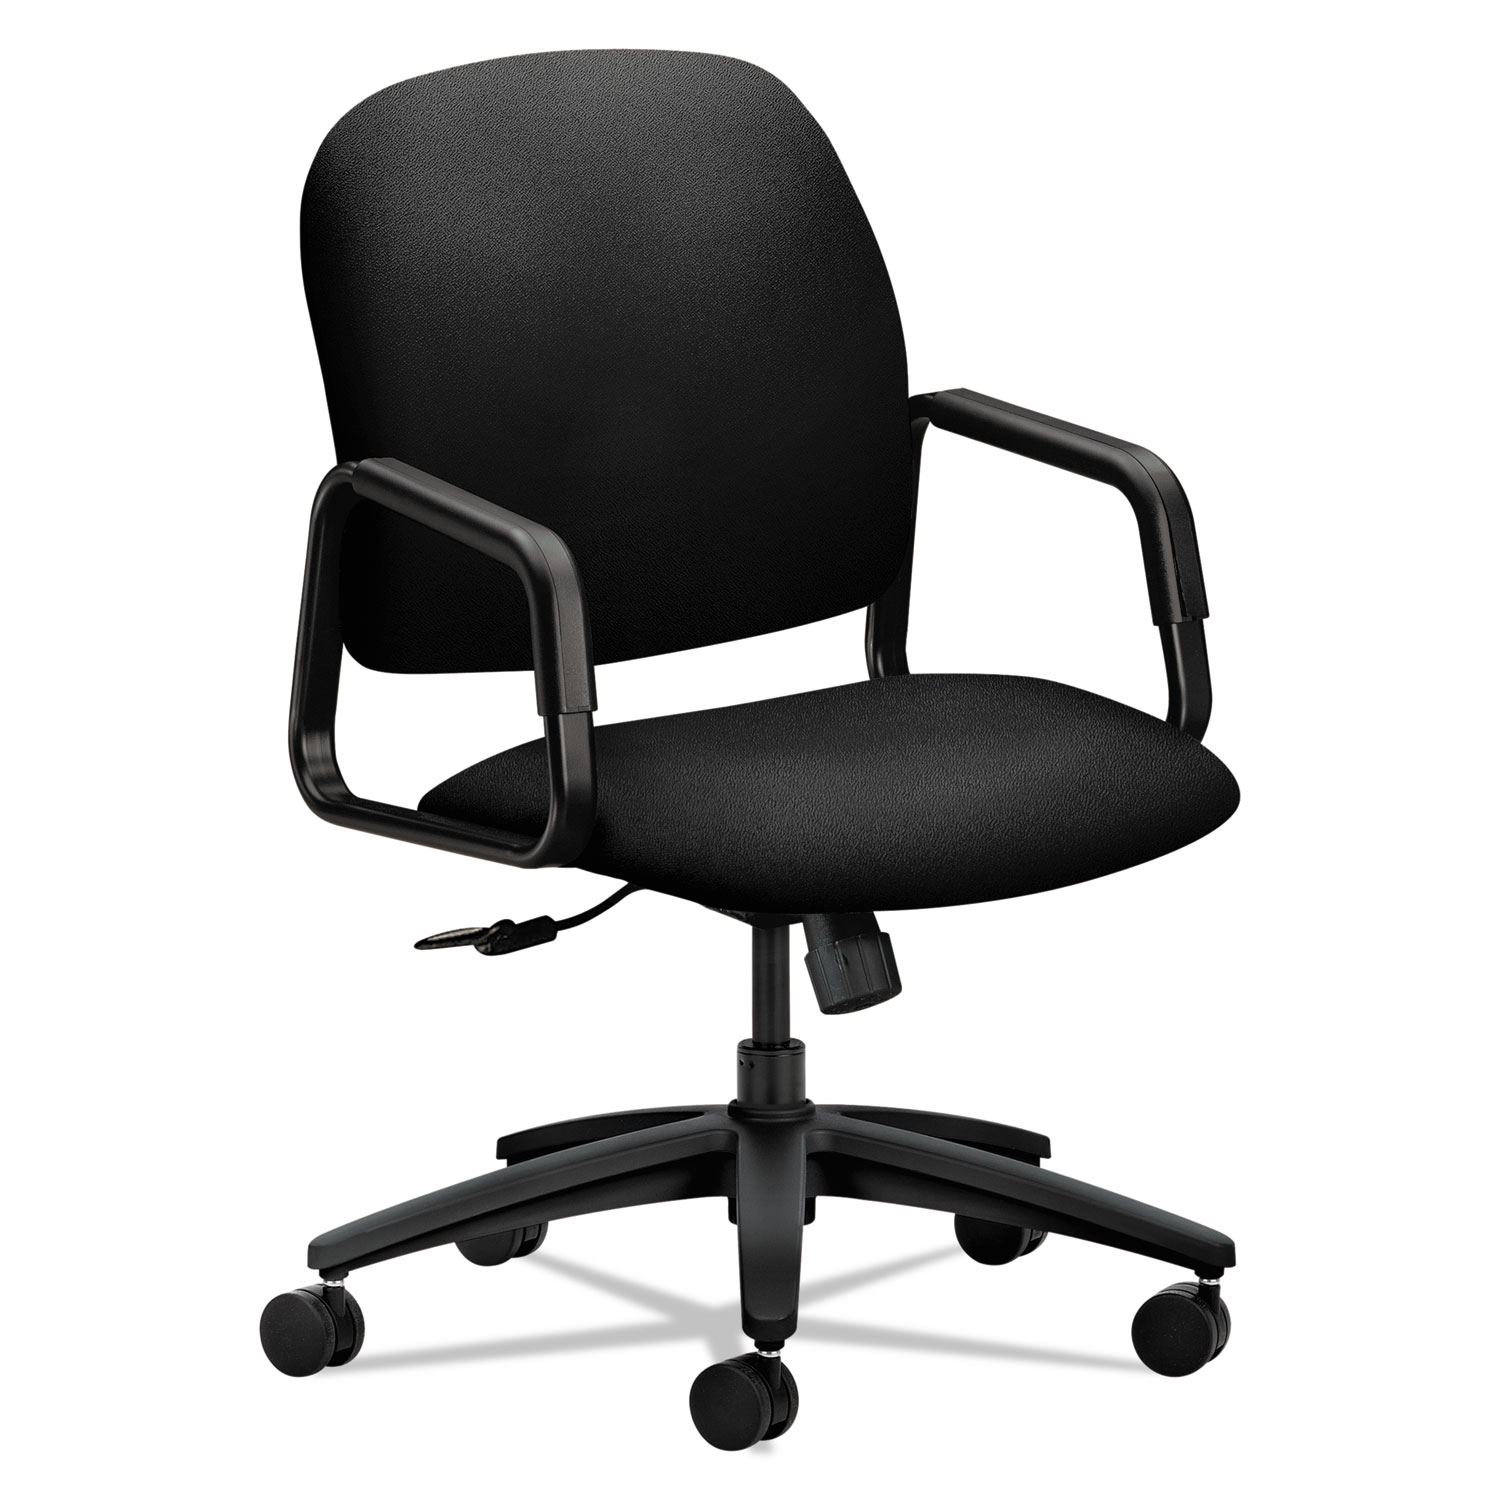  HON H4001.H.CU10.T Solutions Seating 4000 Series Executive High-Back Chair, Supports up to 250 lbs., Black Seat, Black Back, Black Base (HON4001CU10T) 